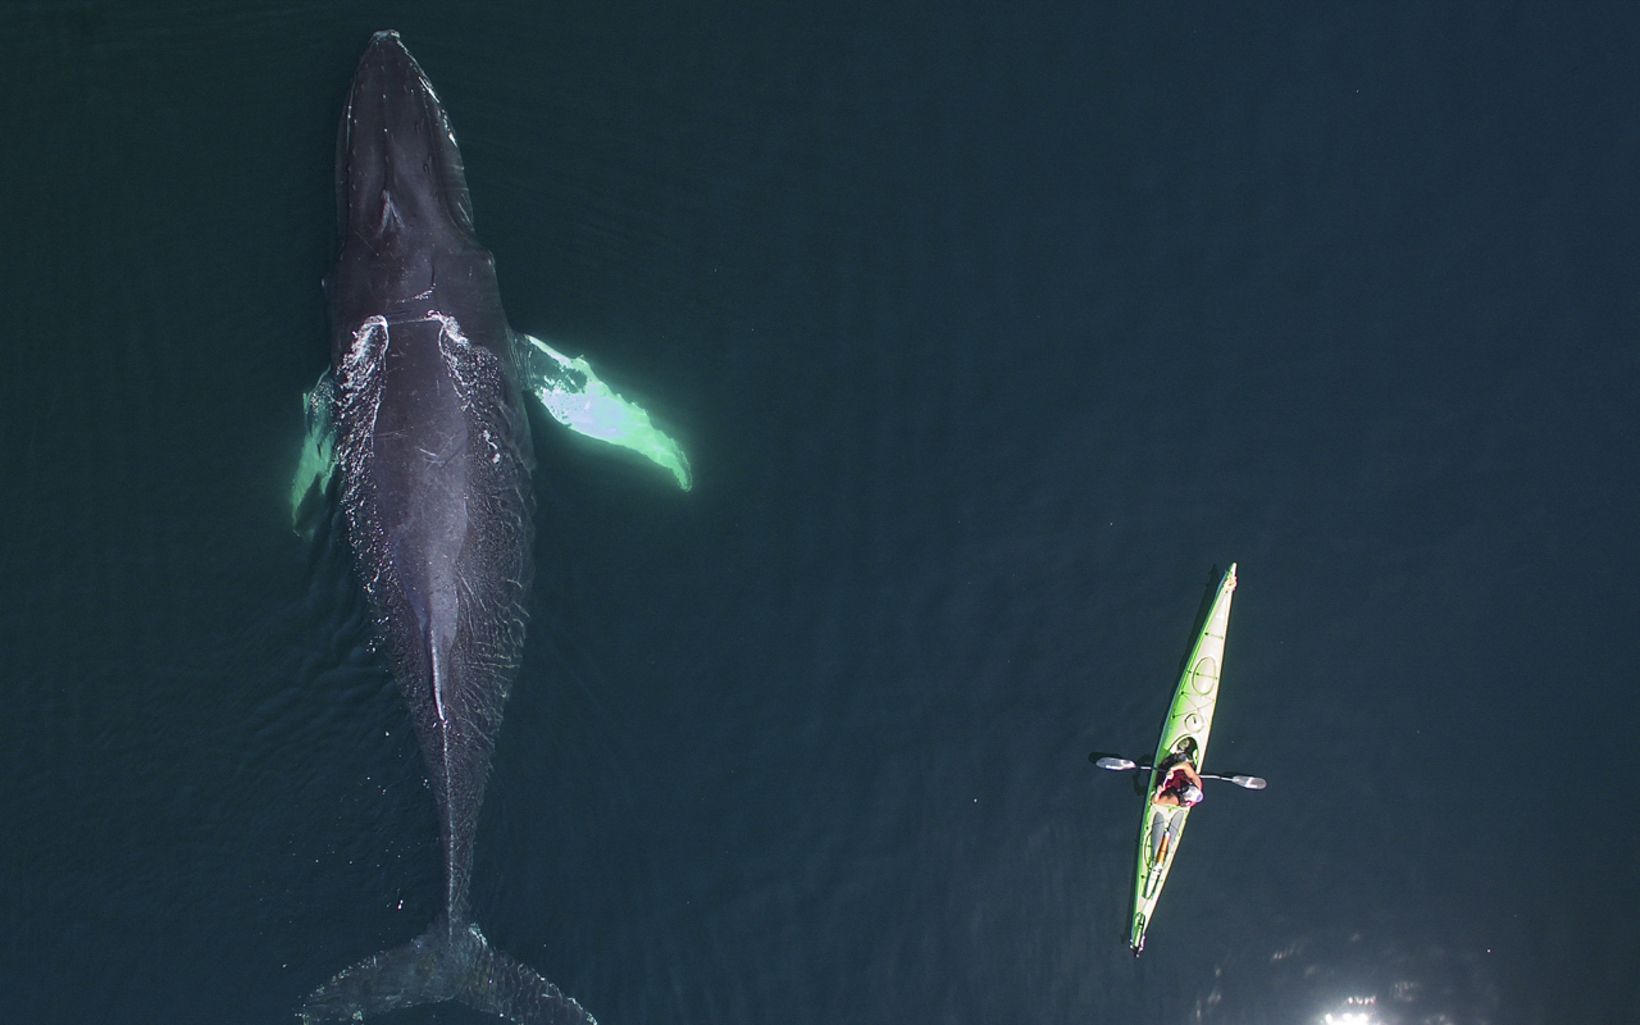 Image displays a kayaker beside a whale in the open ocean. 